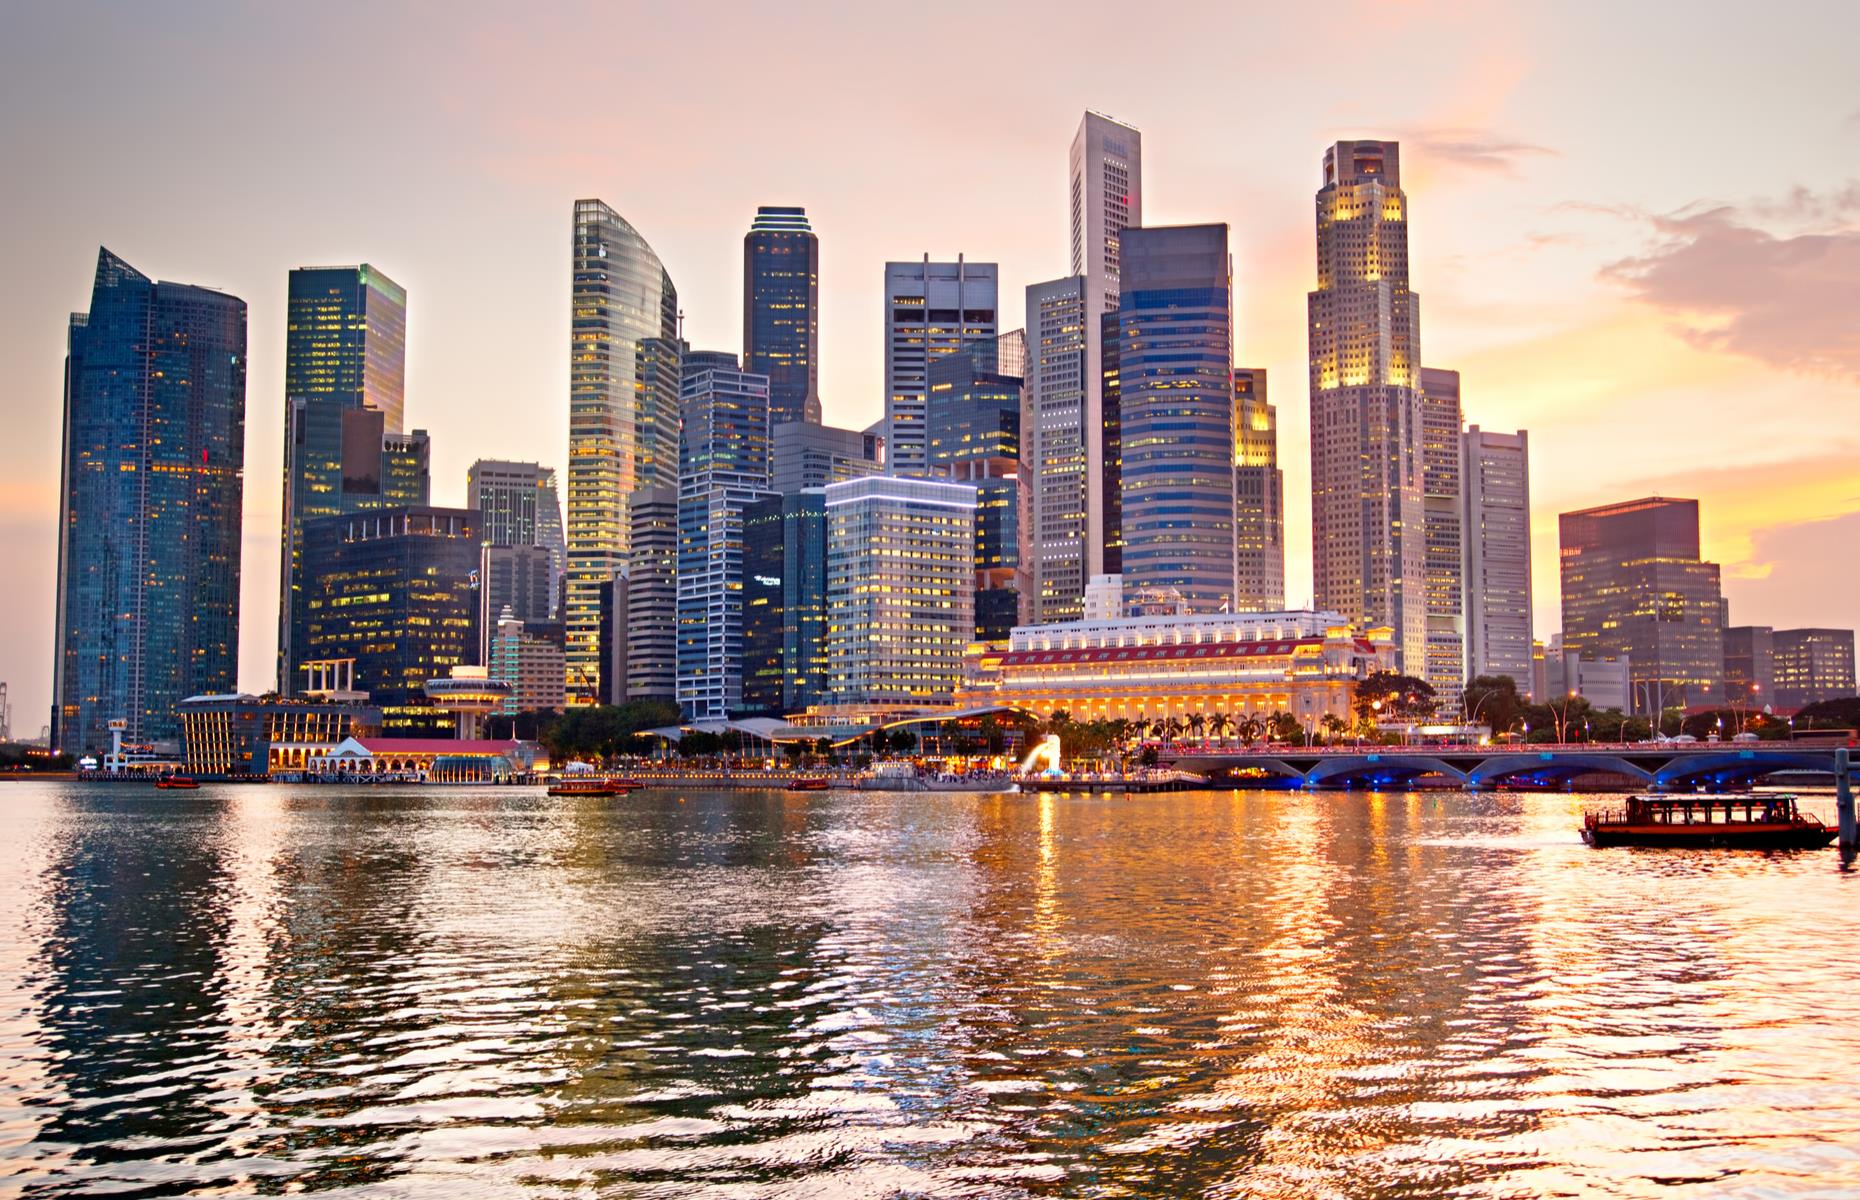 <p>The most peaceful country in Asia, <a href="https://www.loveexploring.com/guides/83823/explore-singapore-the-top-things-to-do-where-to-stay-and-what-to-eat">Singapore's</a> society is very safe <a href="https://www.edb.gov.sg/en/why-singapore/a-great-place-to-live.html#:~:text=You%20and%20your%20family%20can,force%20supported%20by%20proactive%20citizens.">thanks to political stability, low crime rates, a transparent legal system and a reliable police force</a>. Singapore has famously strict laws (notoriously the sale of chewing gum has been illegal since 1992) which some say help keep its crime levels low.</p>